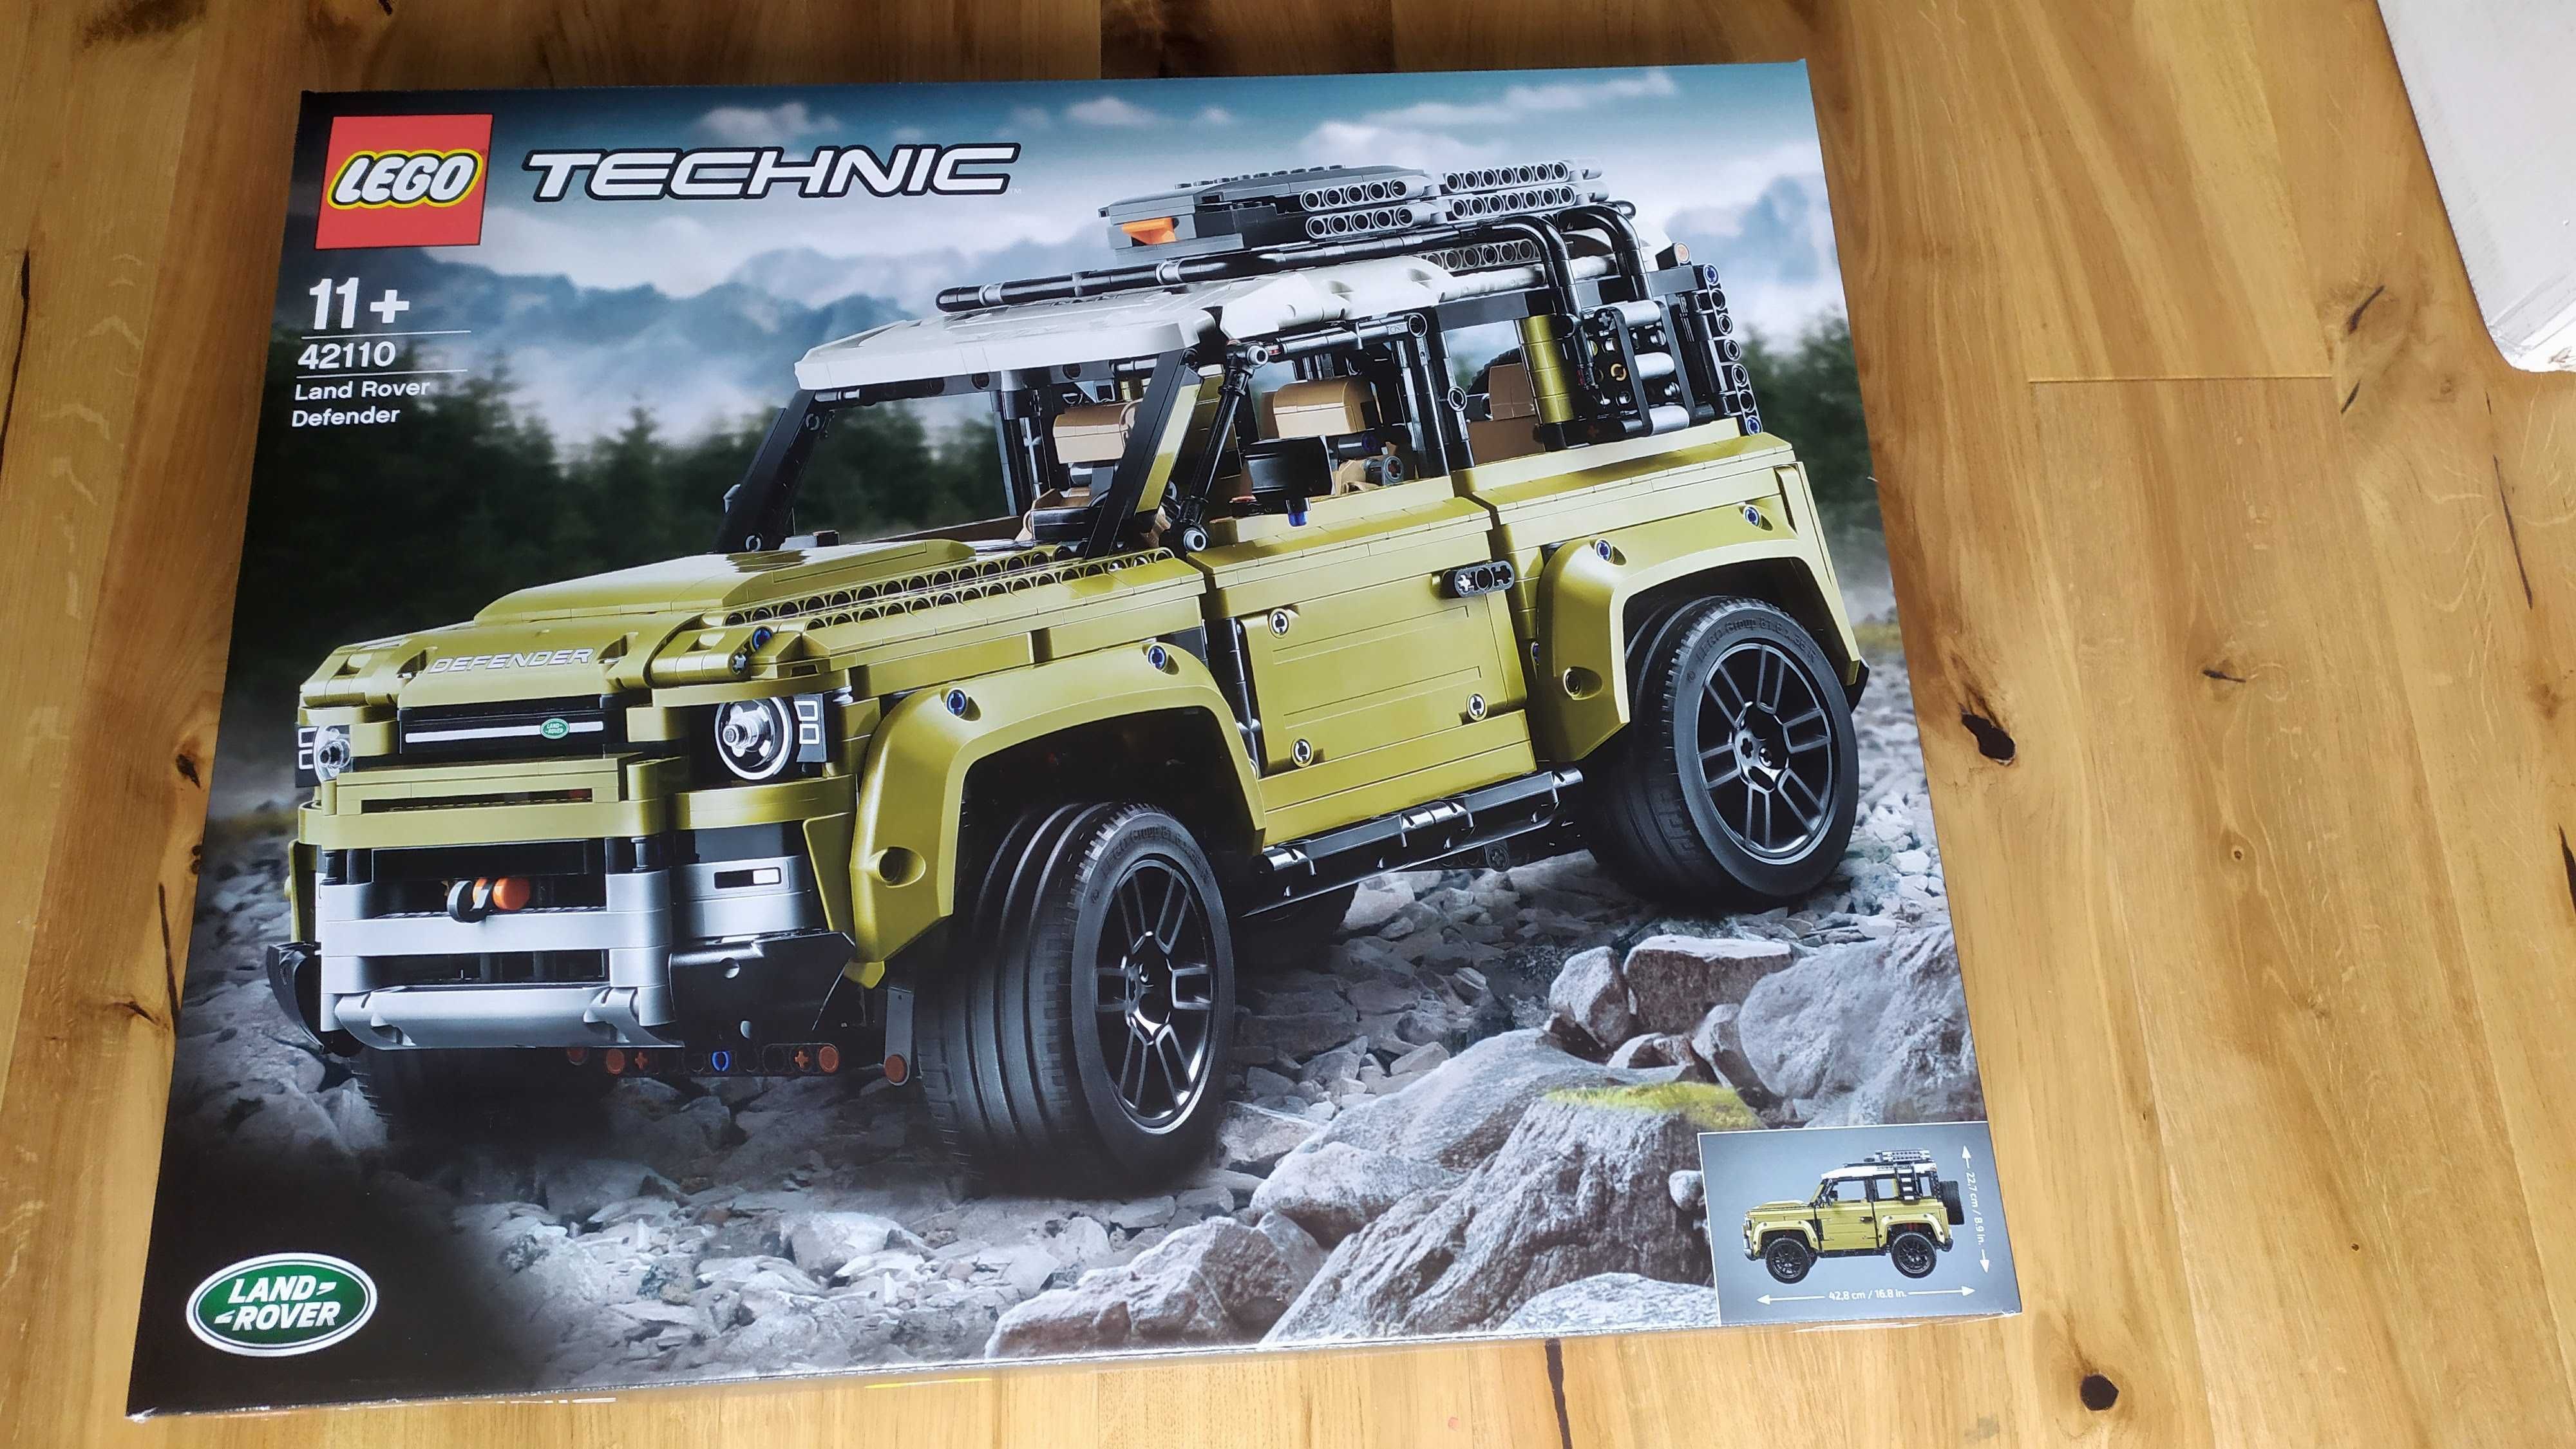 Lego Technic Land Rover Defender 42110 - Nowy, plomby producenta